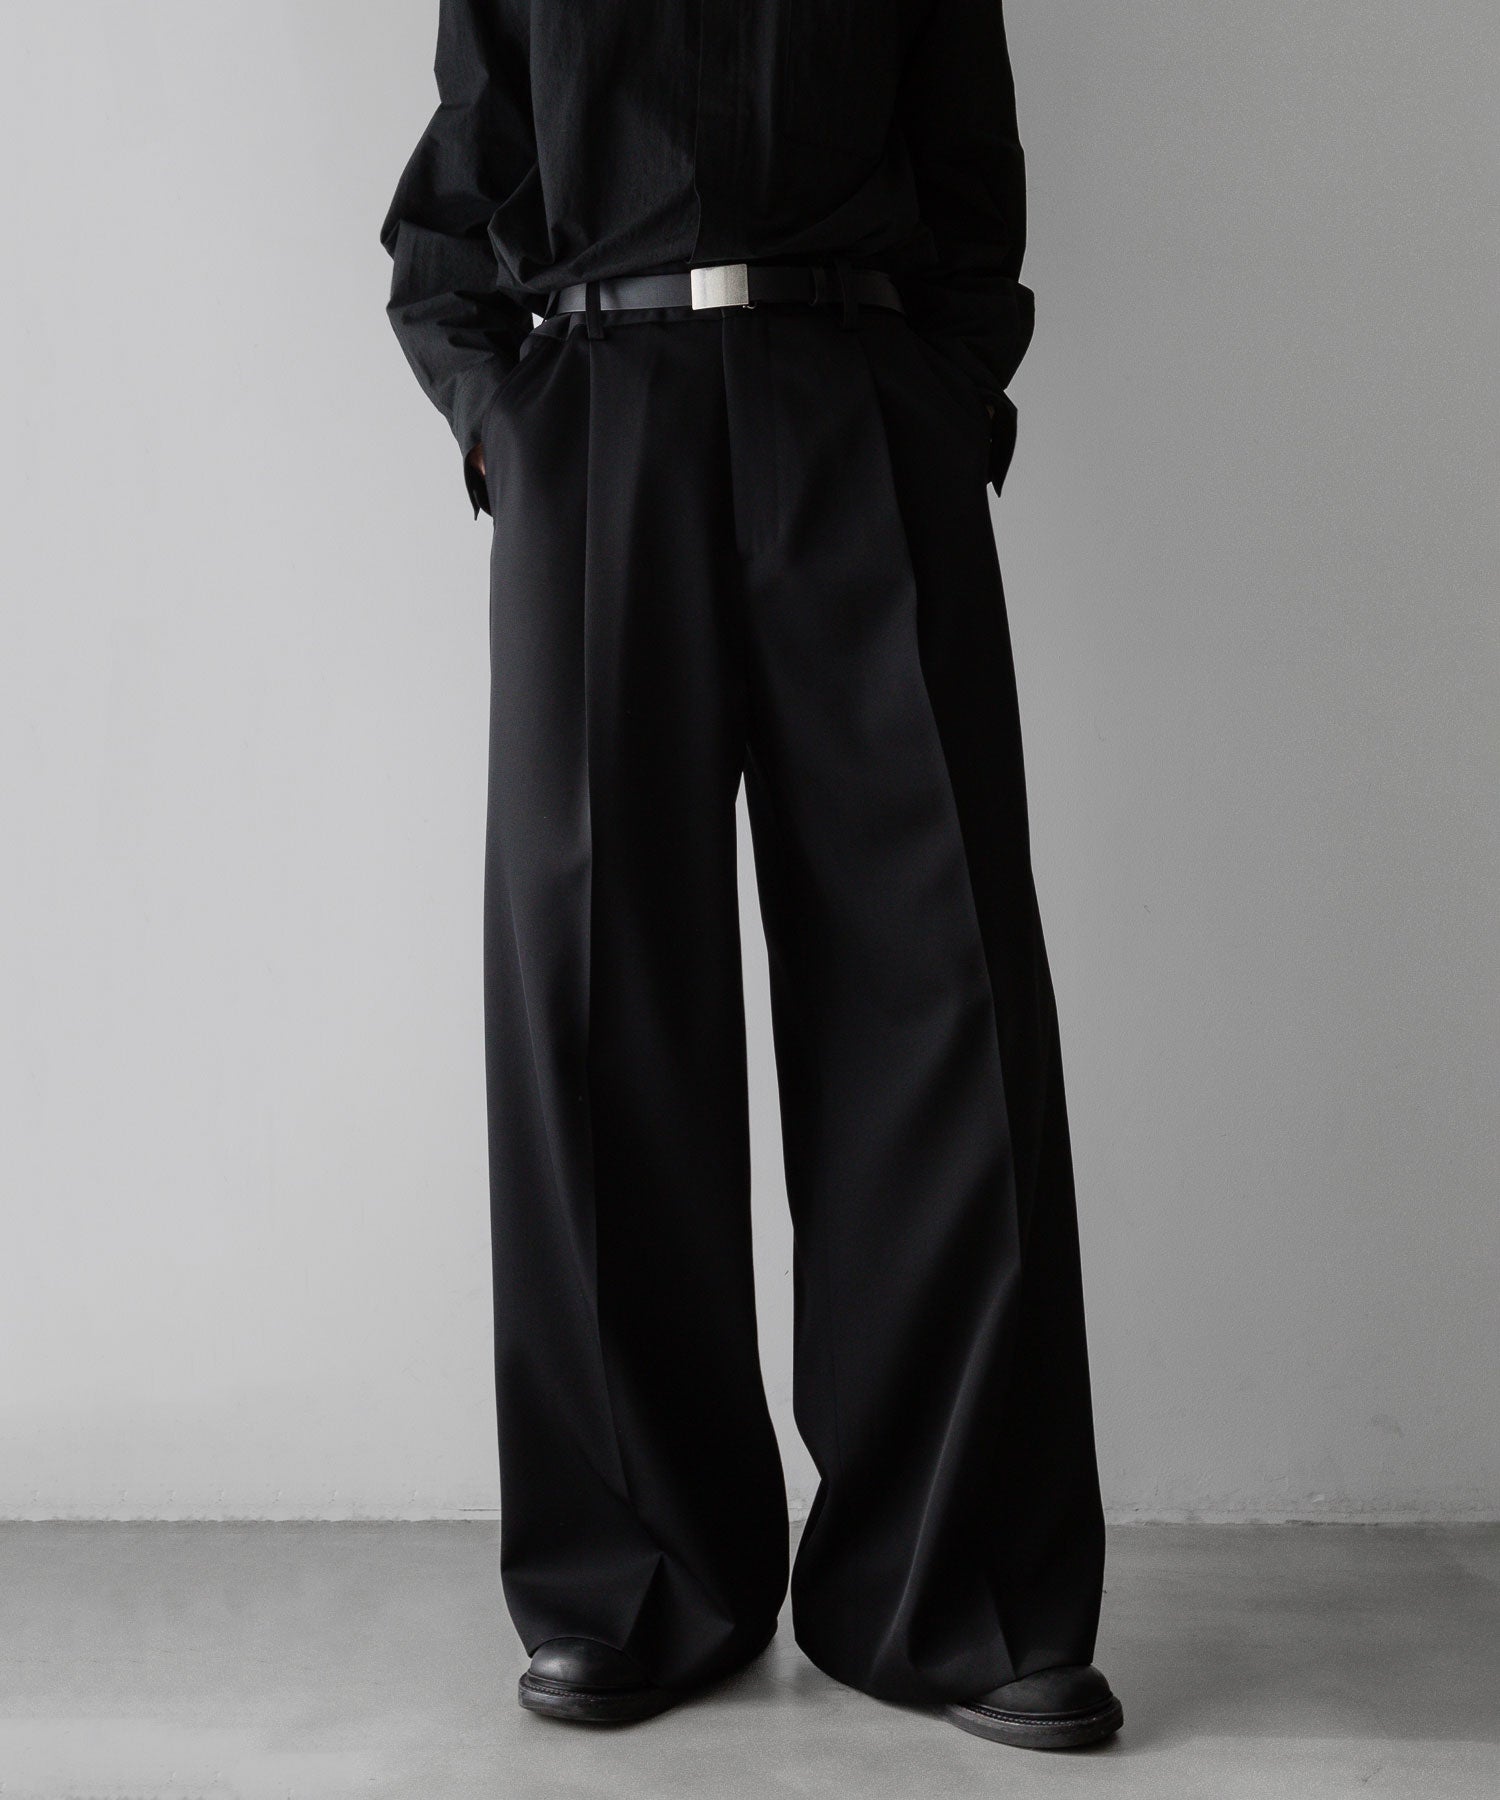 【stein/シュタイン】EXTRA WIDE TROUSERS　ブラック　S290Supe